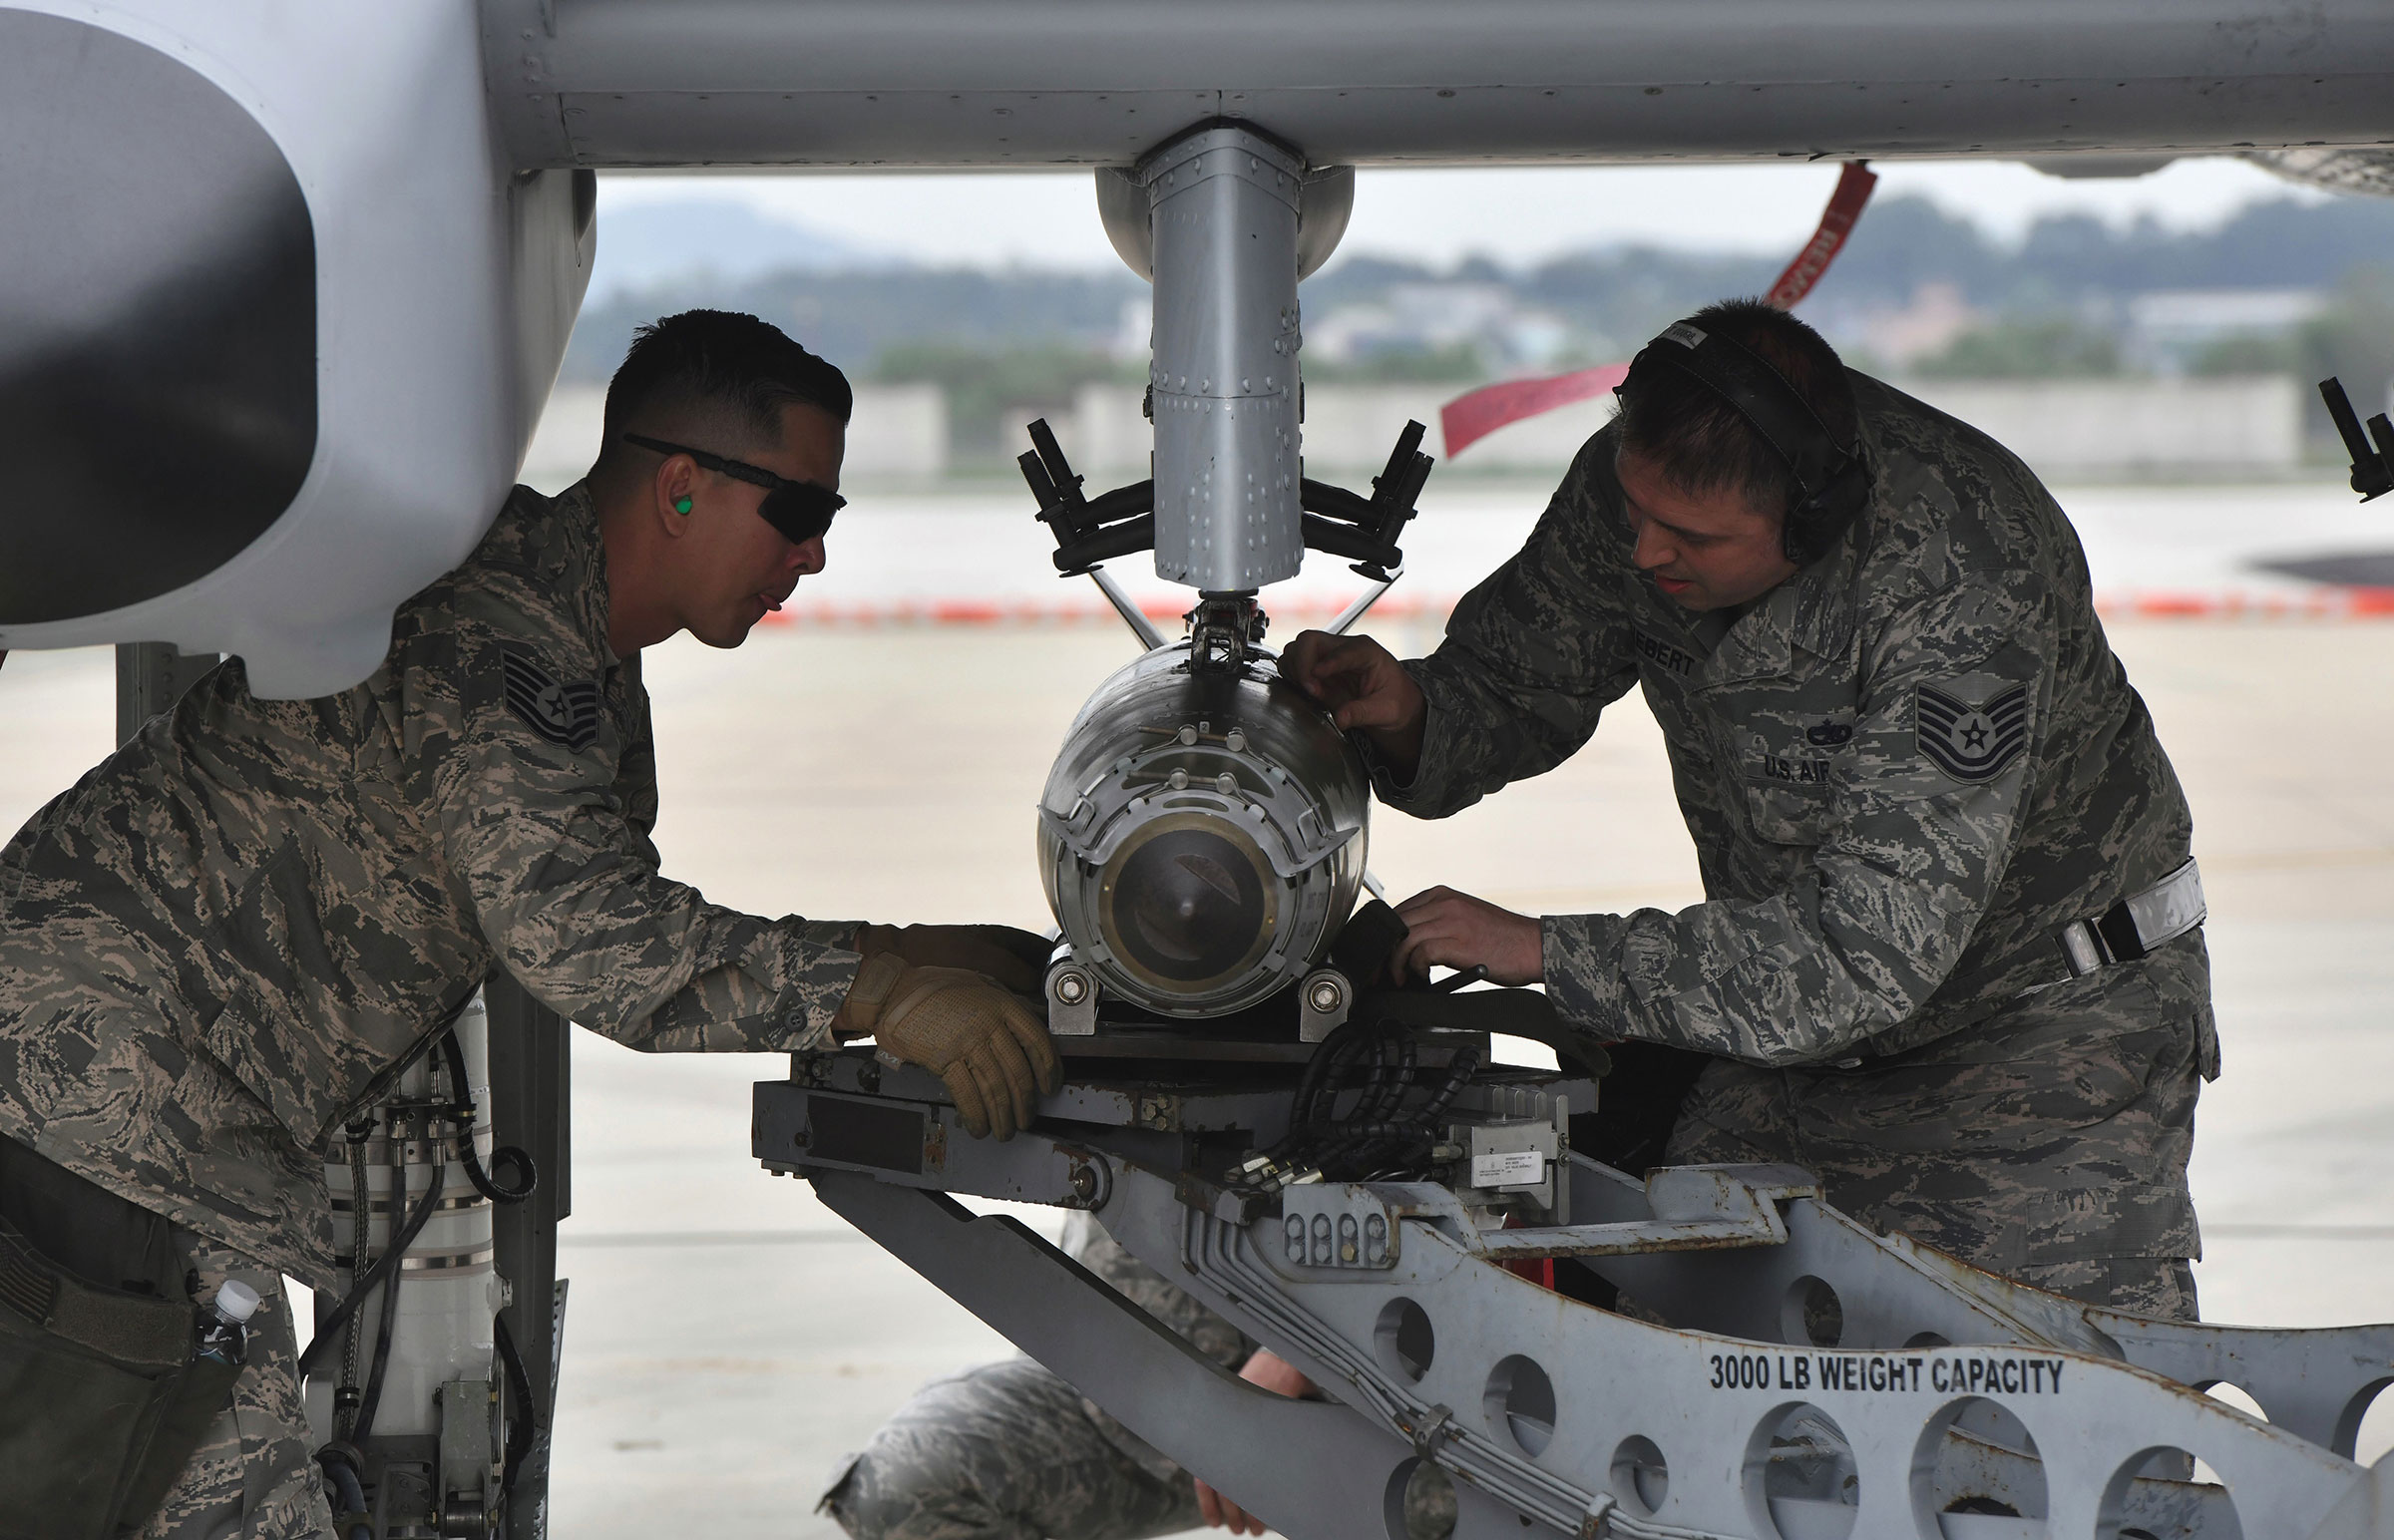 U.S. airmen inspect a bomb loaded onto an A-10 Thunderbolt II close air support aircraft during a demonstration during "Air Power Day" preview at Osan Air Base in Pyeongtaek, South Korea on Sept. 20, 2019. (Jung Yeon-je—AFP/Getty Images)